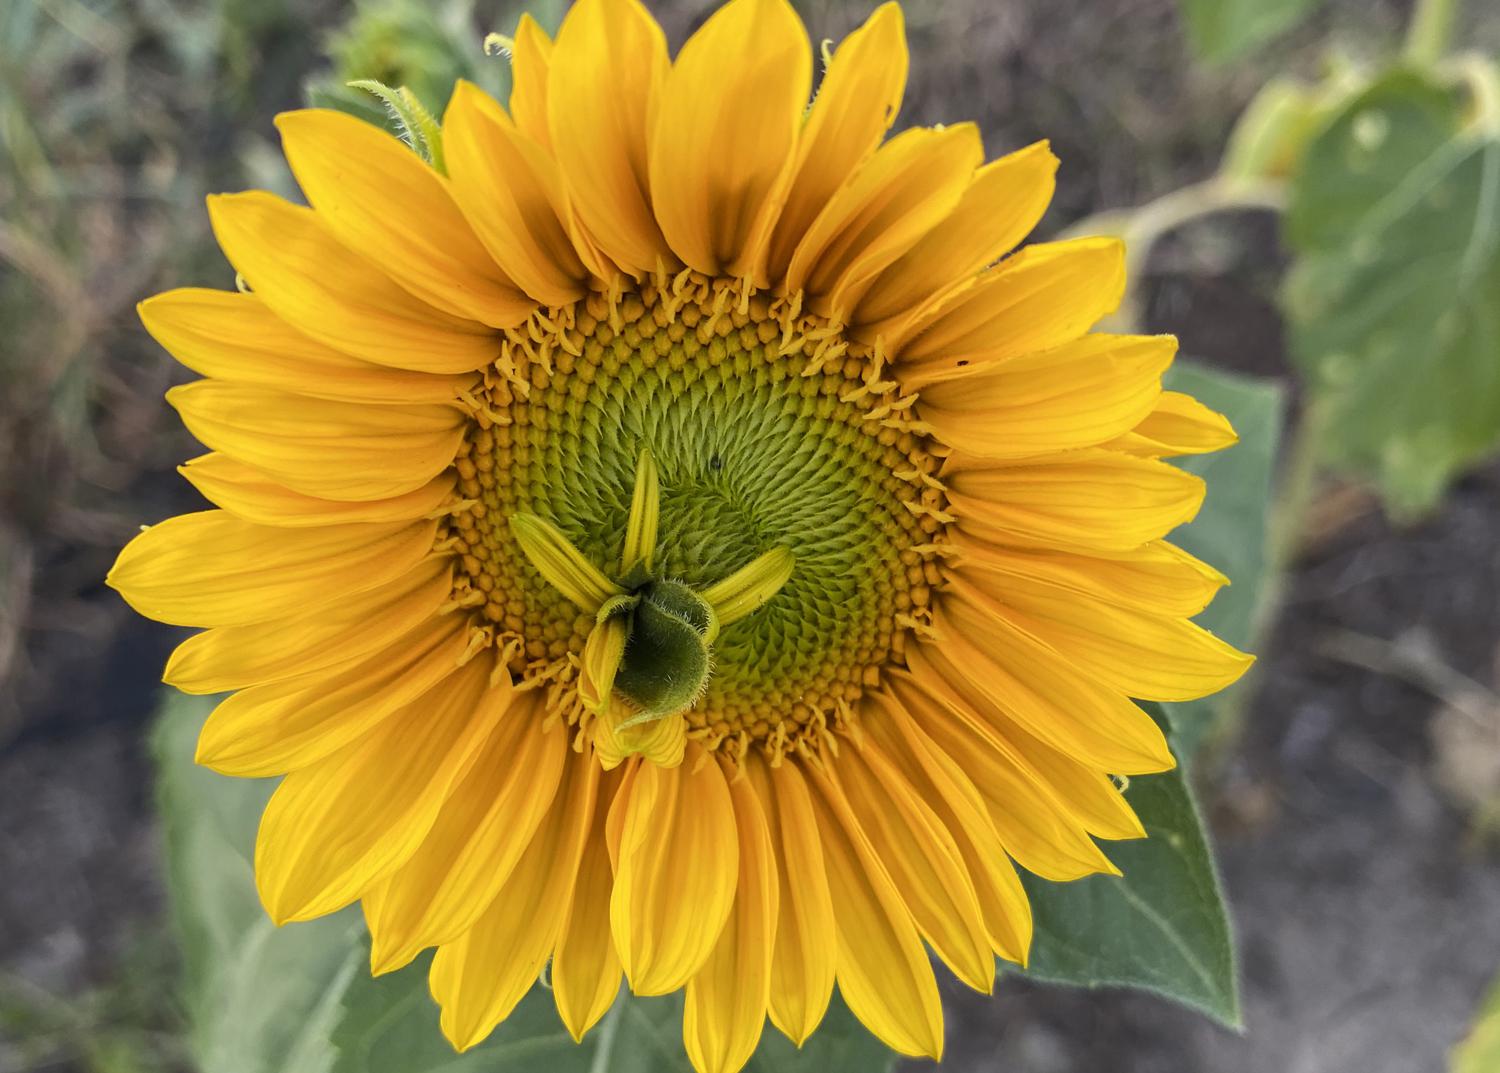 A large, yellow bloom.